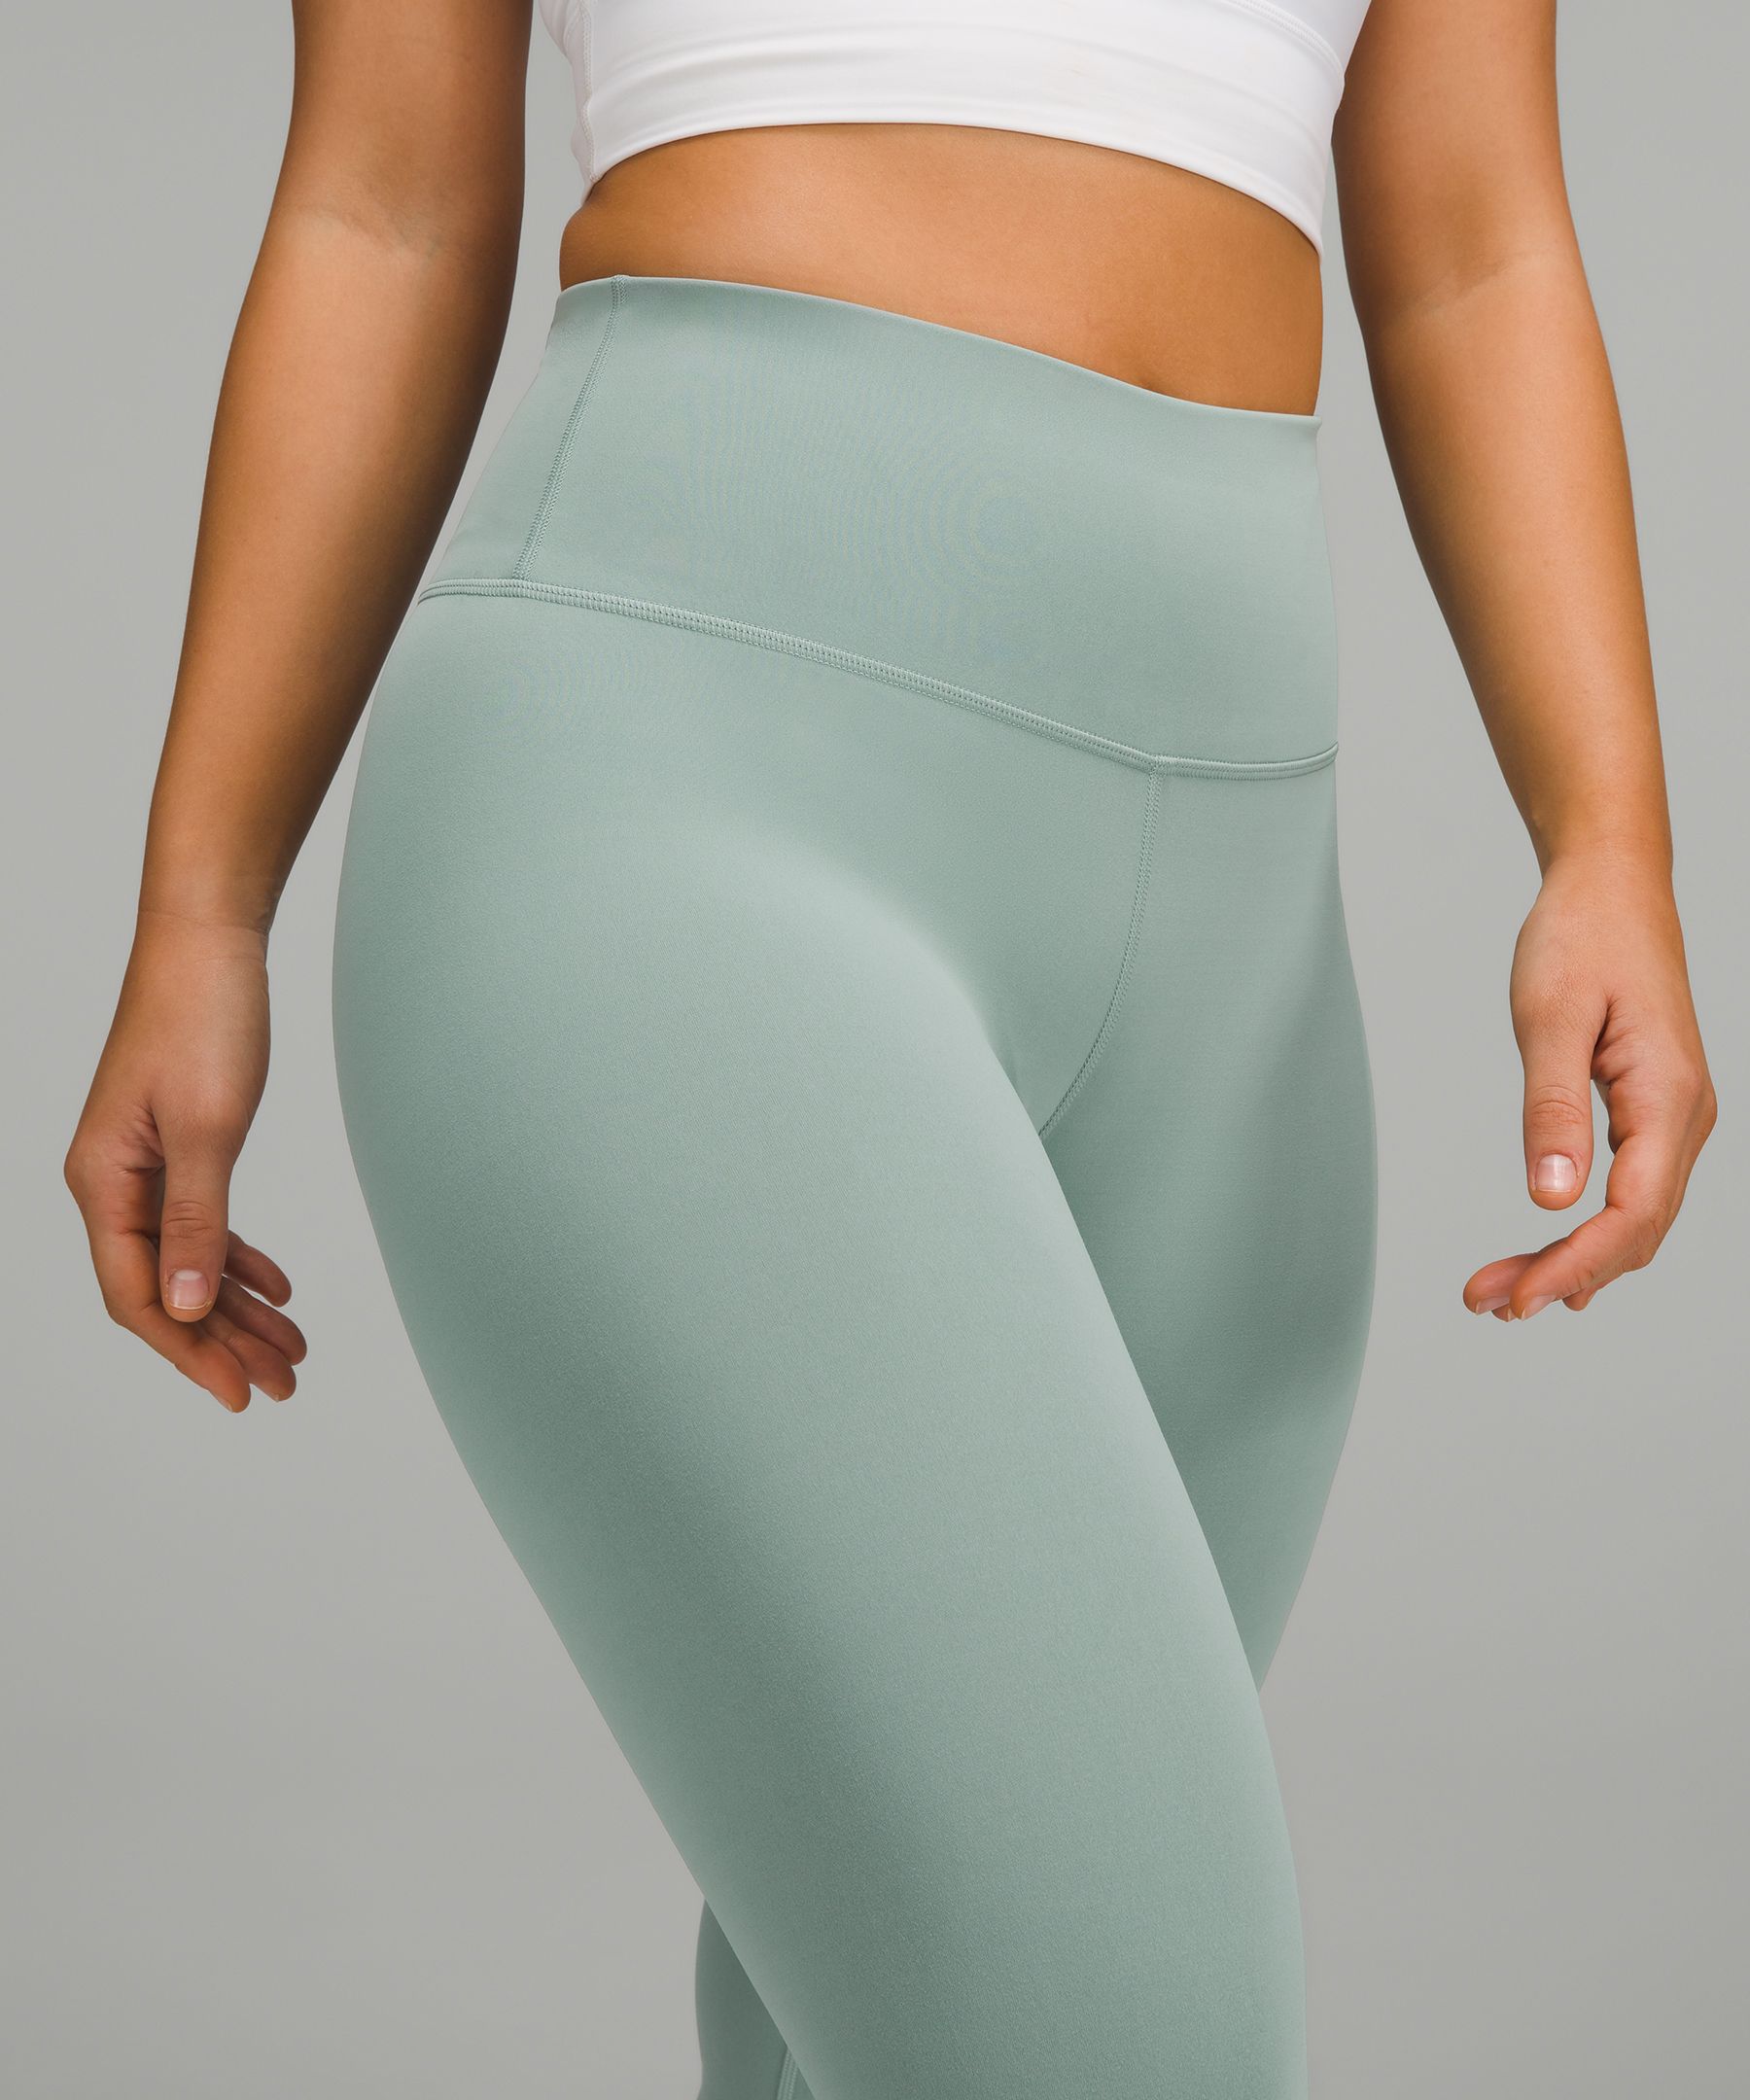 5 Faves & a Dud: Introducing Contour Fit - AthletiKaty